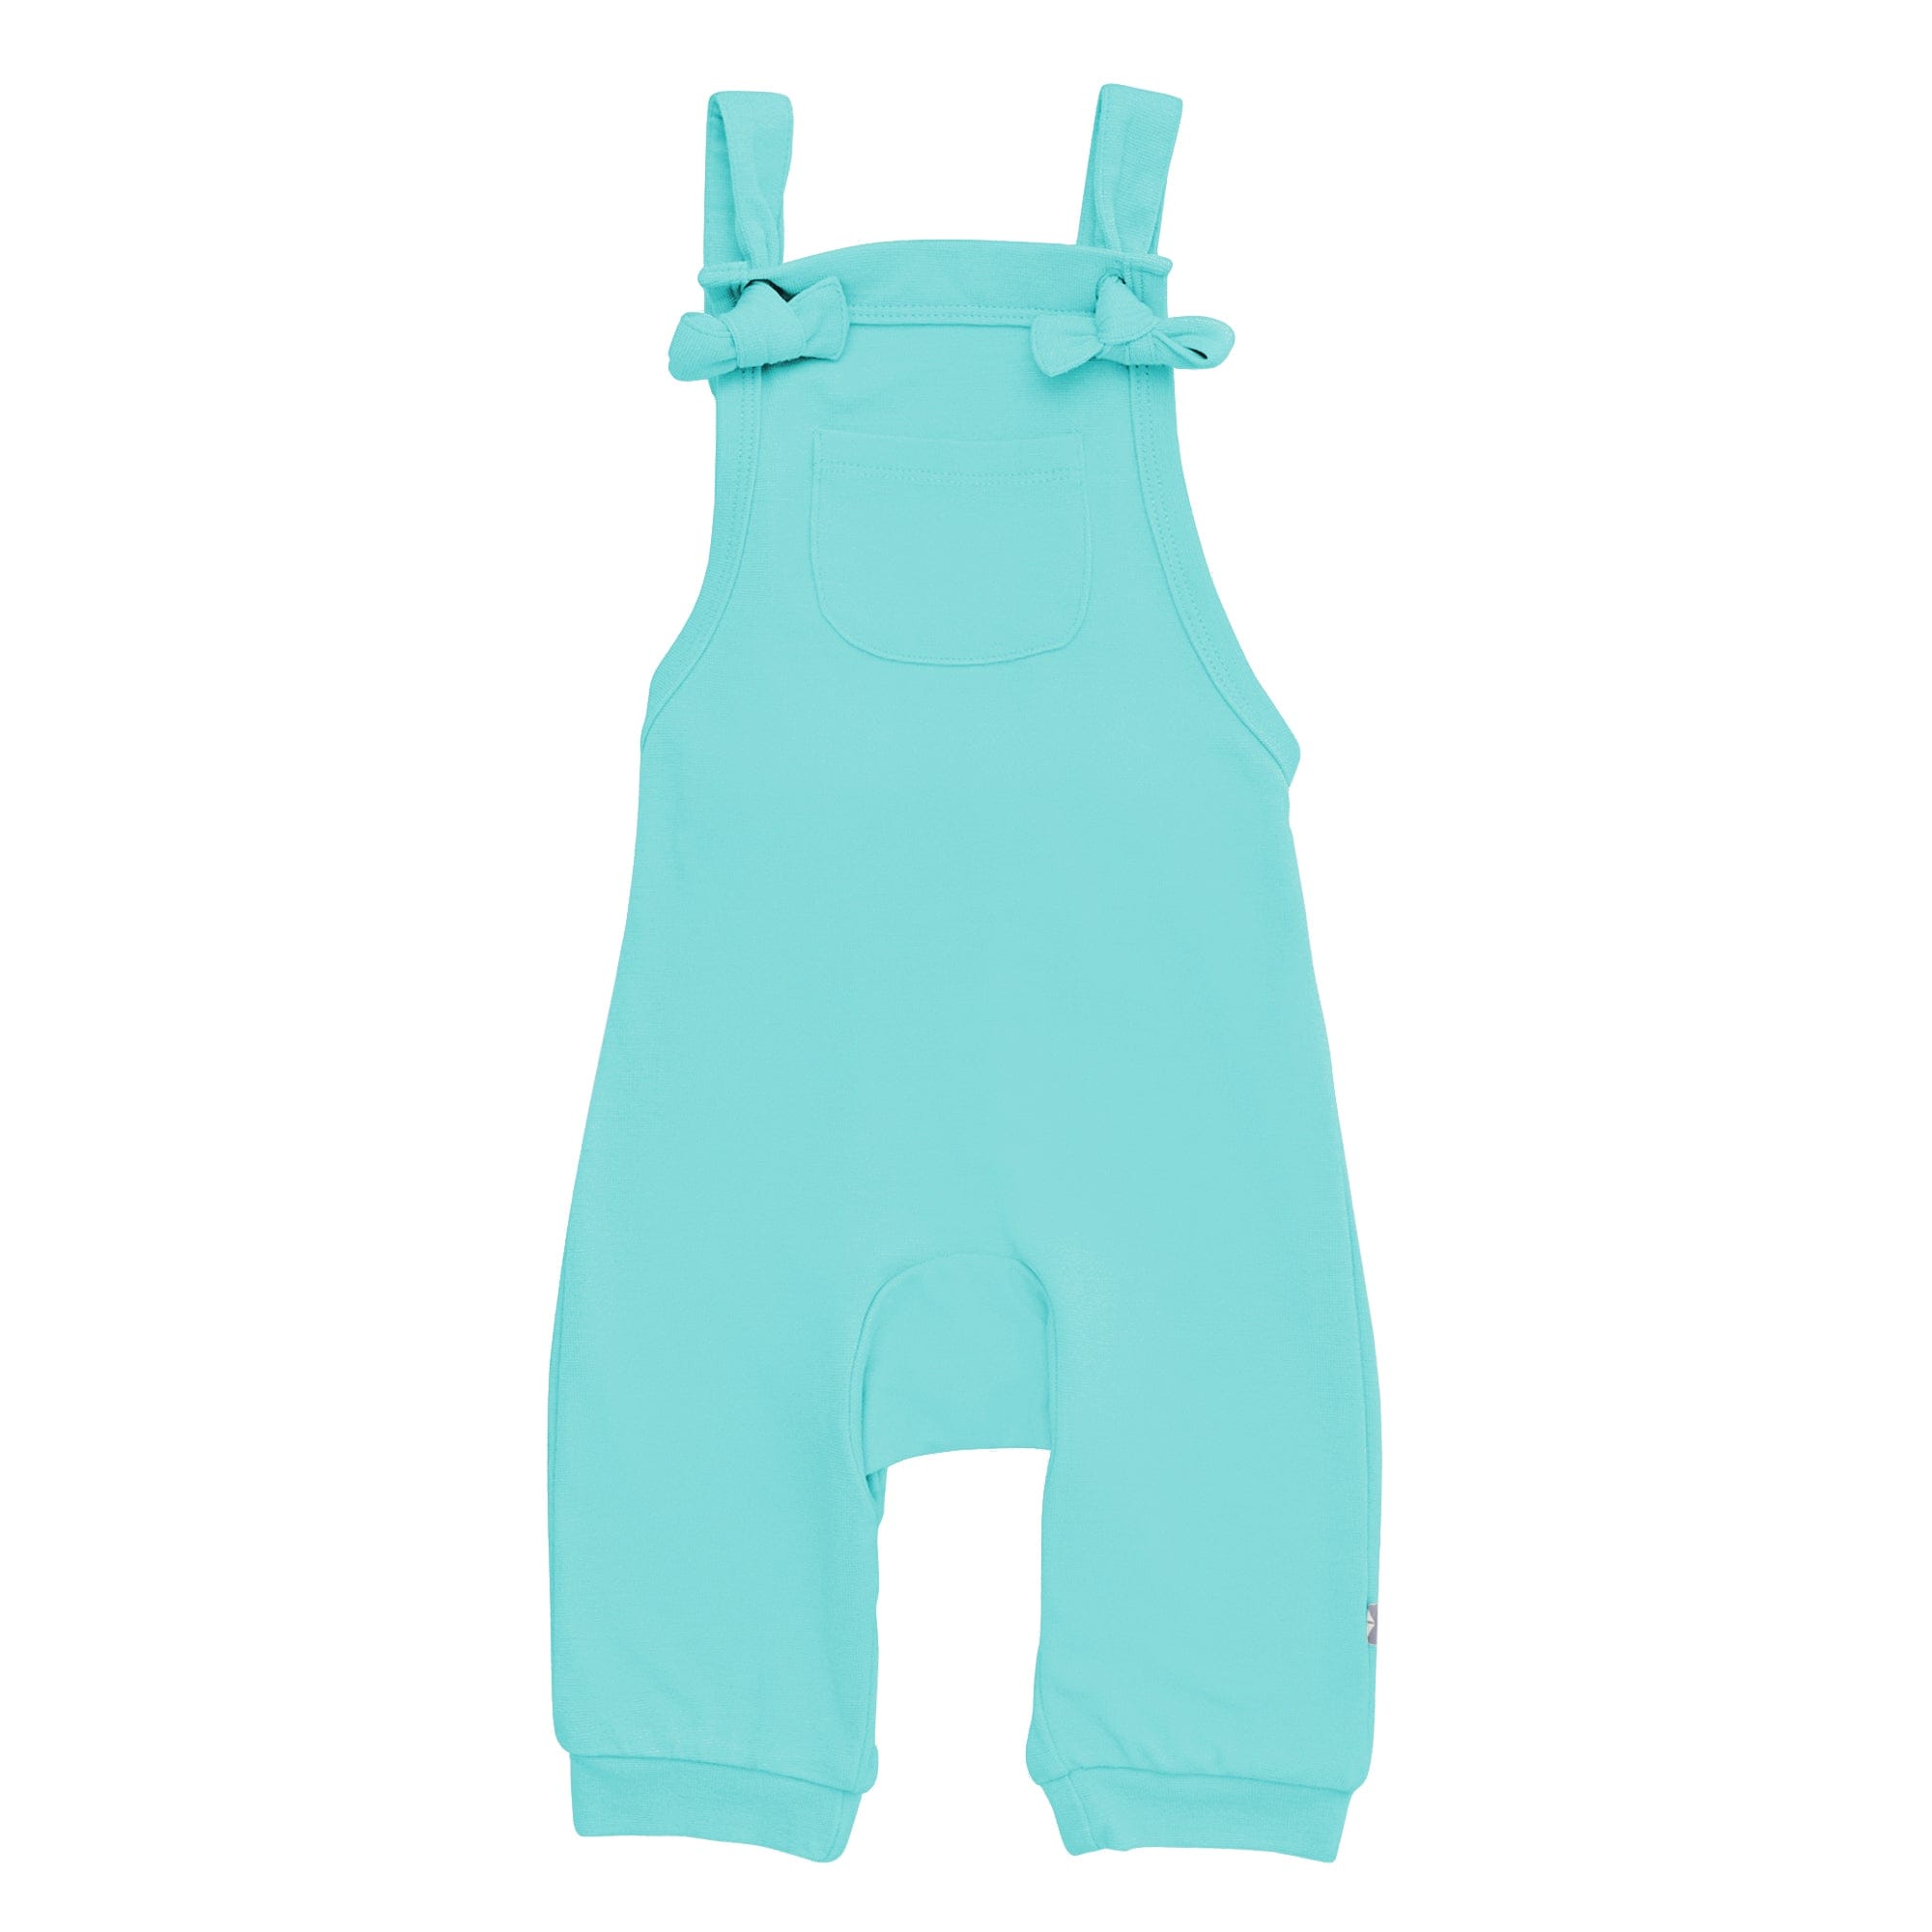 Kyte BABY Baby Overall Bamboo Jersey Overall in Robin